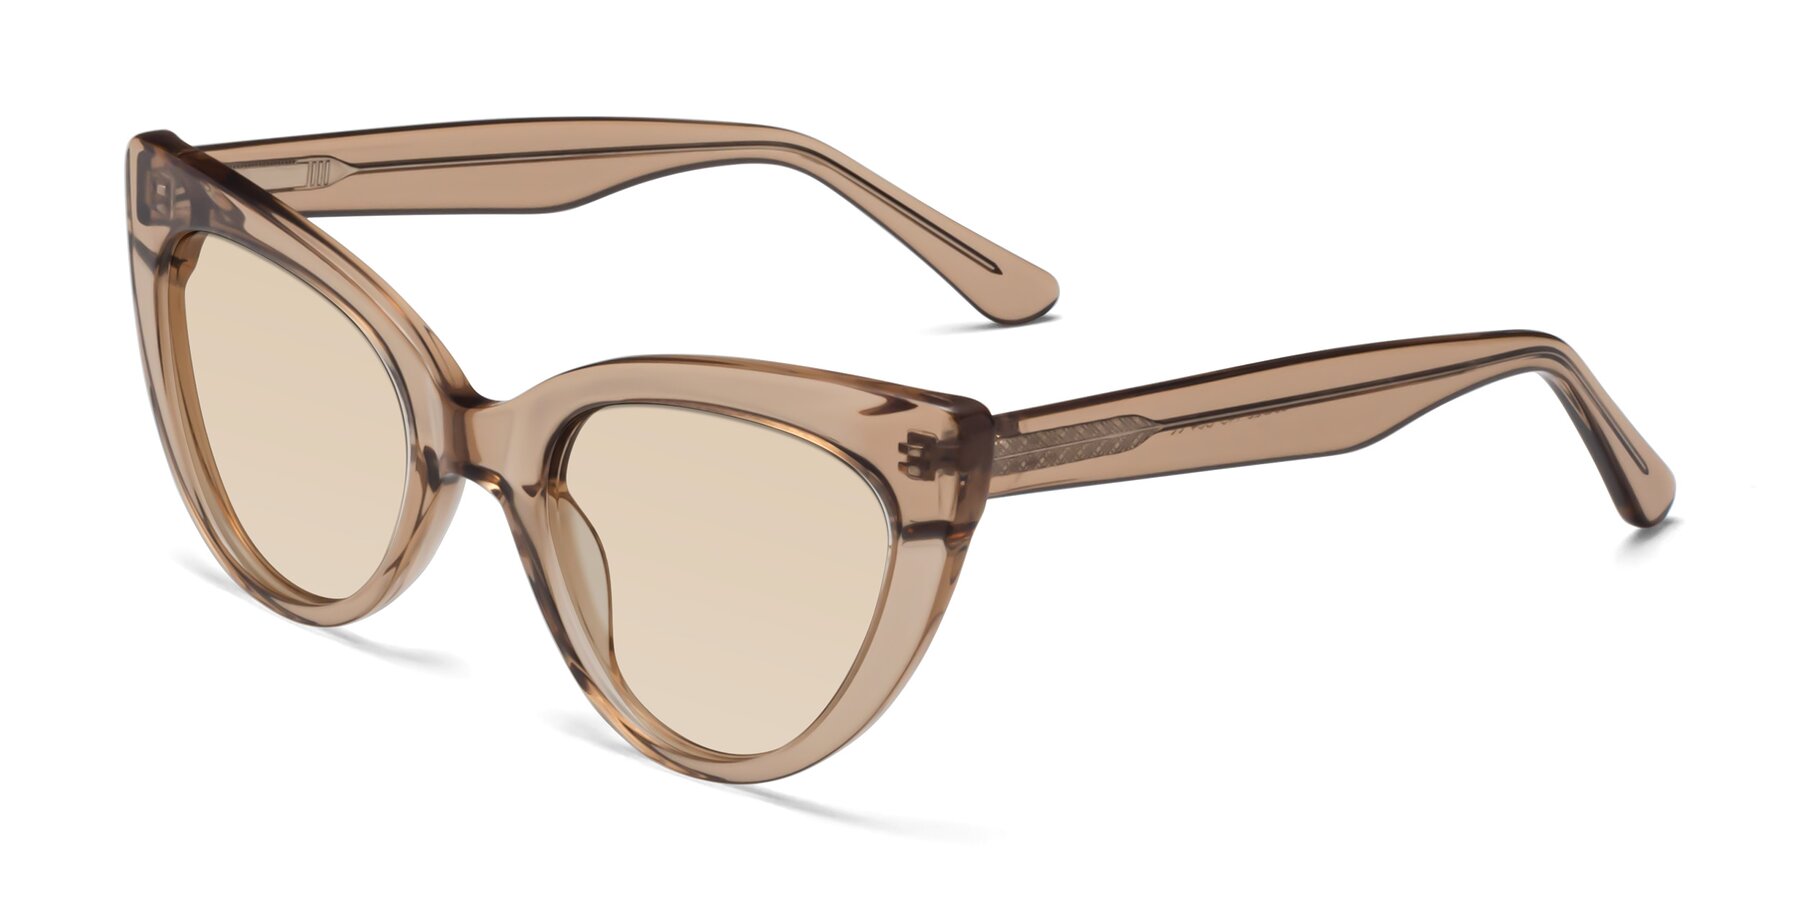 Angle of Tiesi in Caramel with Light Brown Tinted Lenses